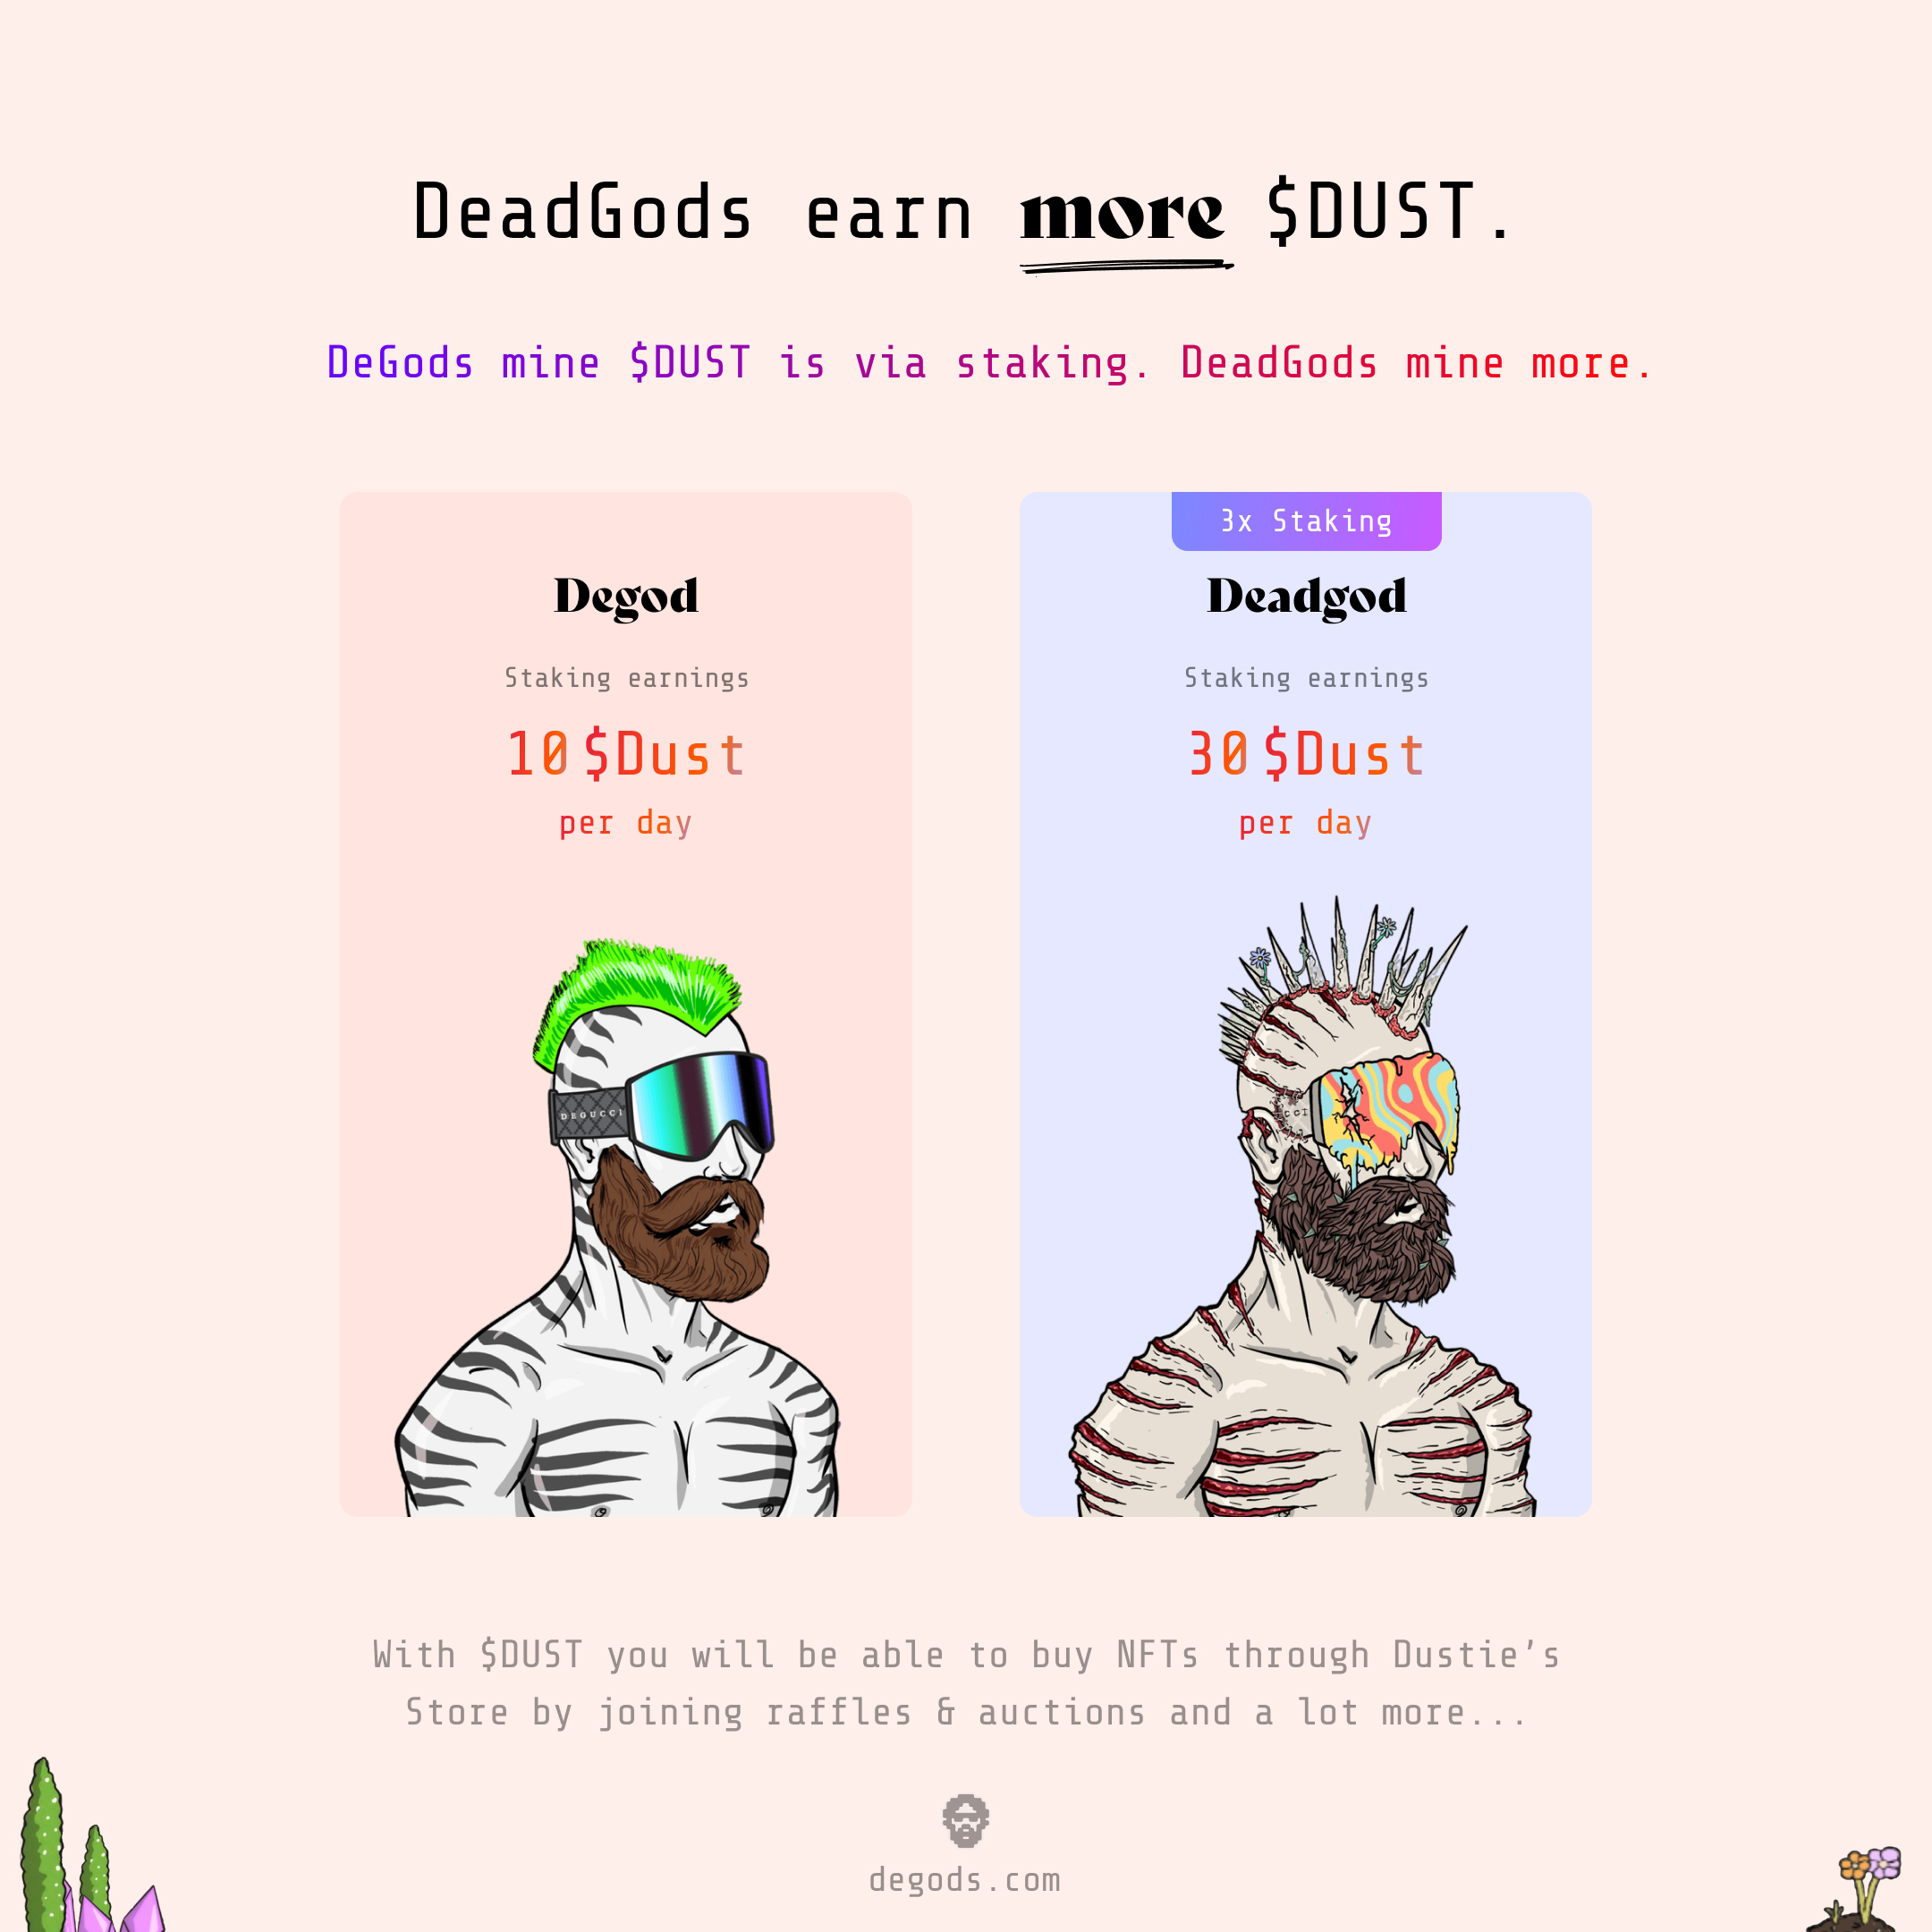 DeGods (33.3%) on Twitter: "DeadGods is a first-of-its-kind NFT collection launching on March 31st. This is not your typical mint. It's a lot cooler than that. Here is everything you need to